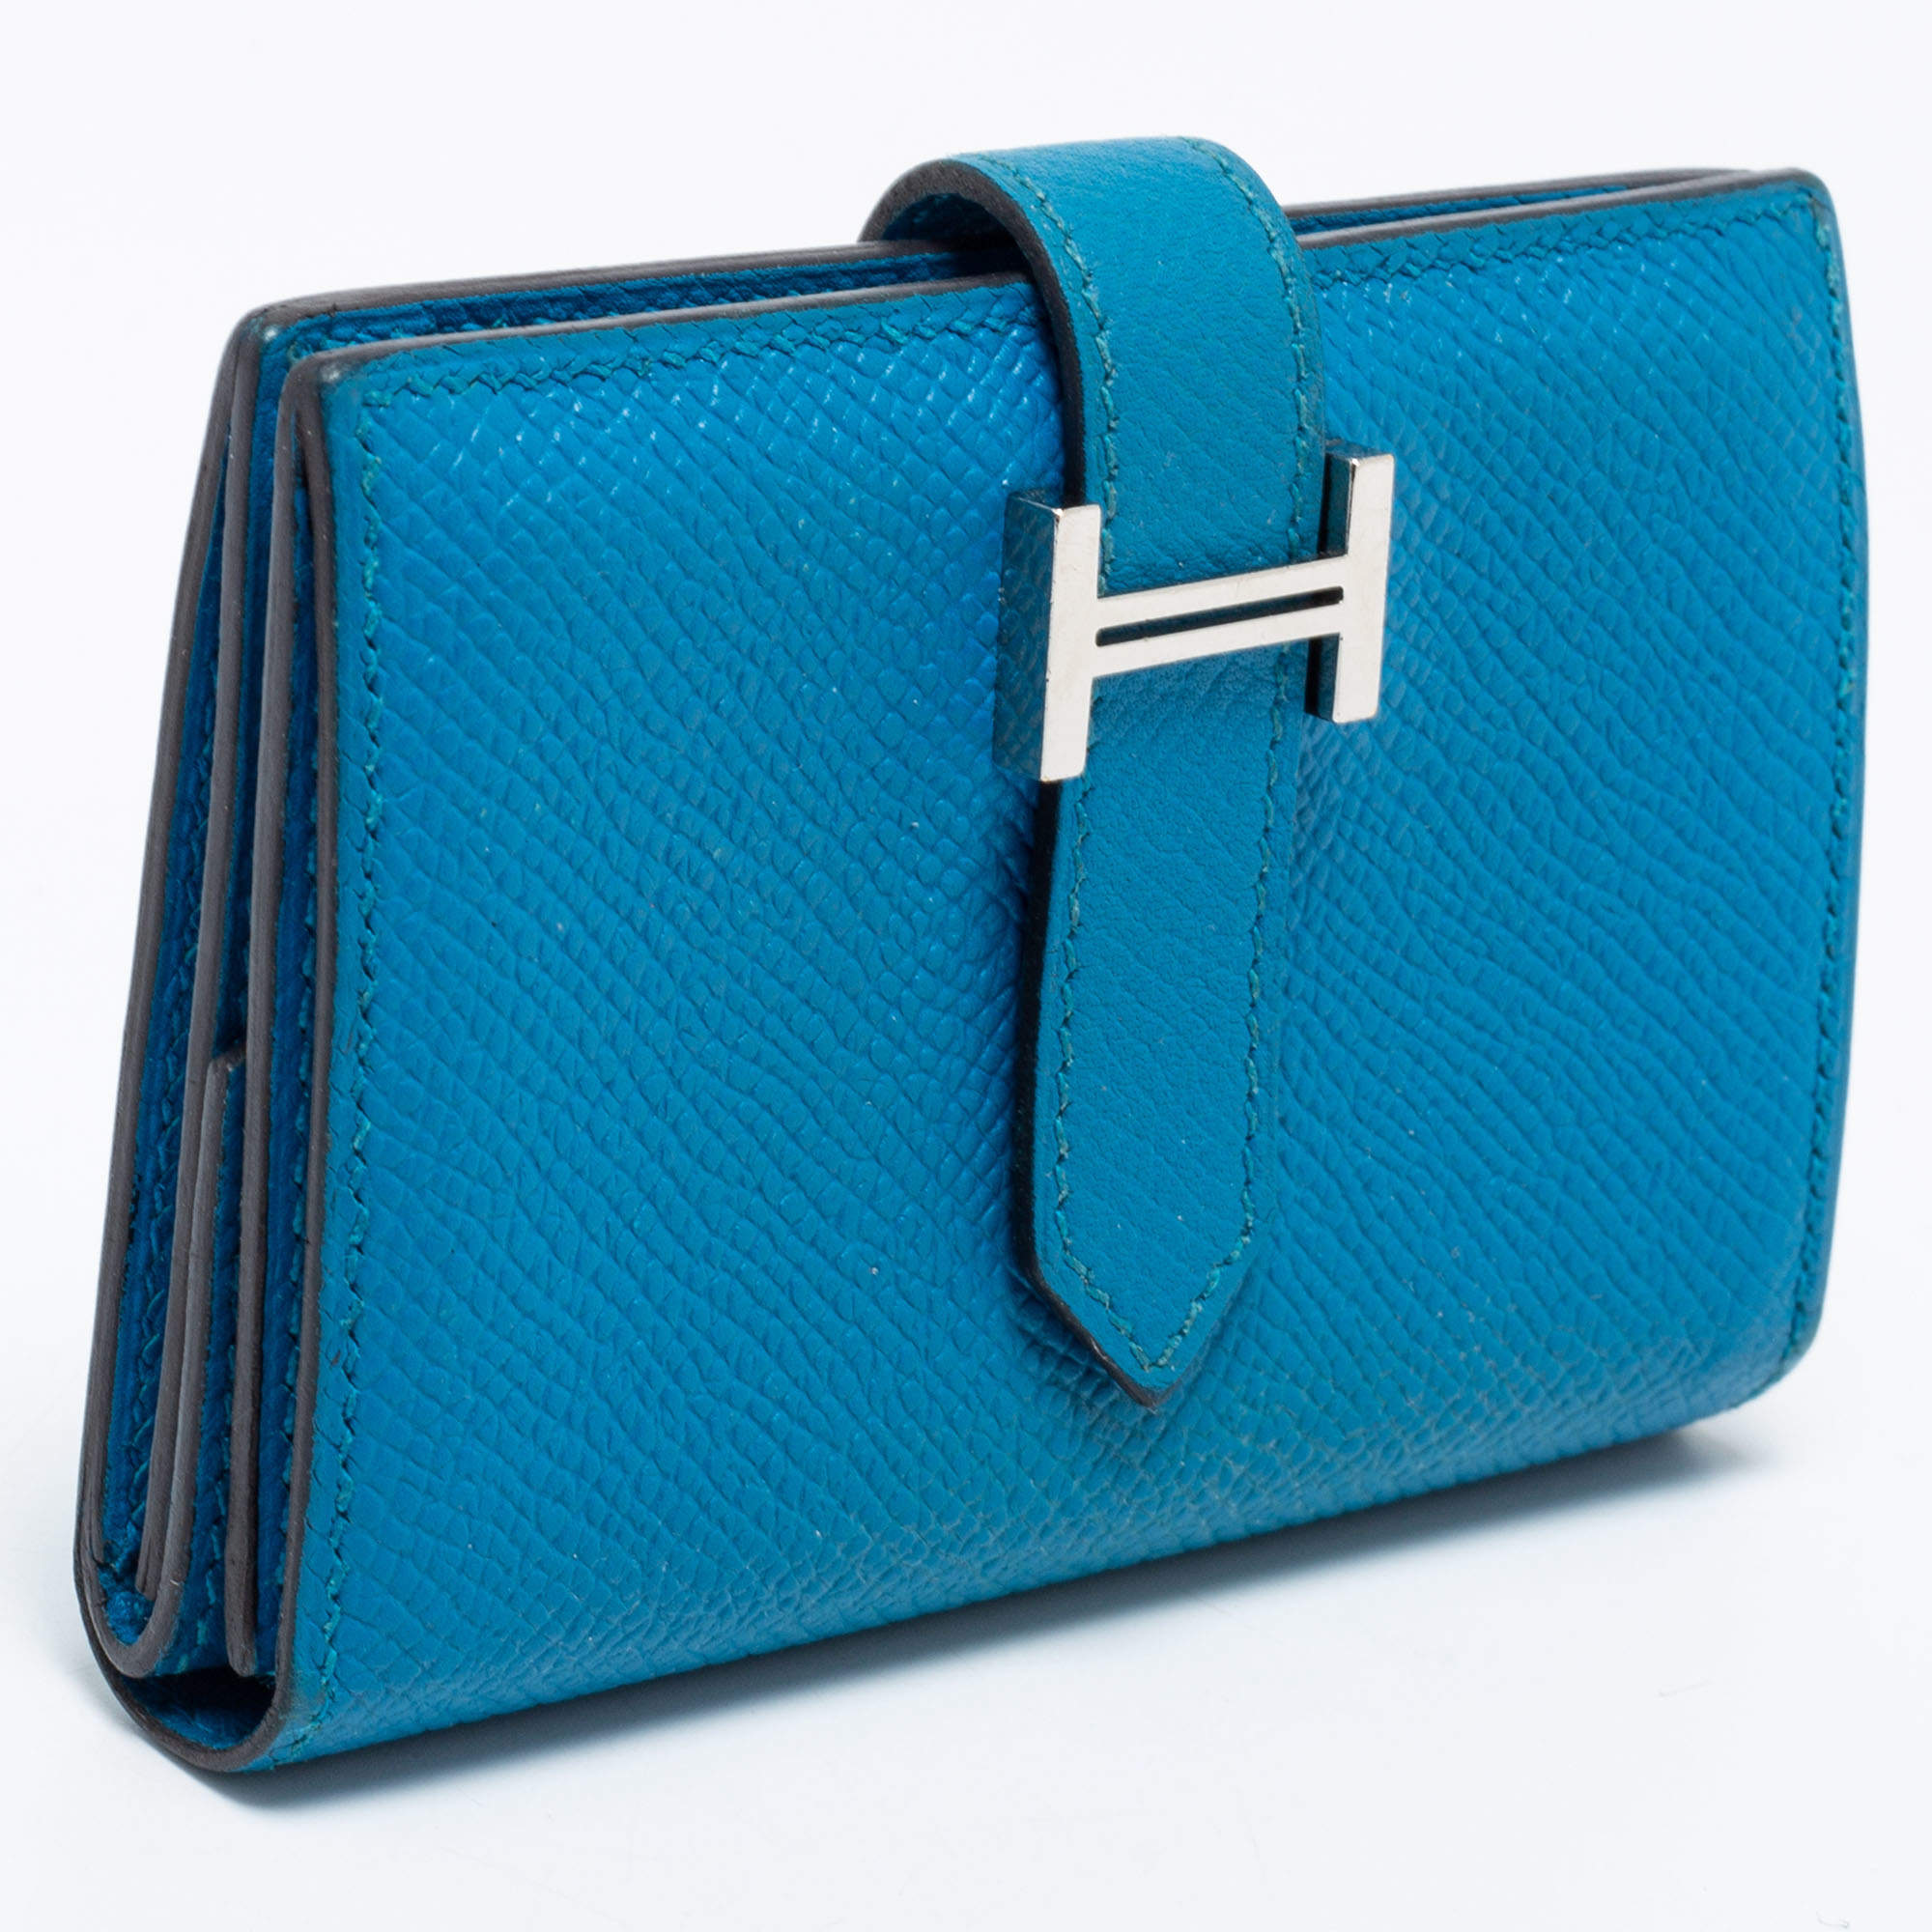 Hermès Rose Texas And Bleu Izmir Epsom Mini Bearn Wallet, 2015 And Rouge  Casaque Epsom Mini Bearn Wallet, 2016 Available For Immediate Sale At  Sotheby's